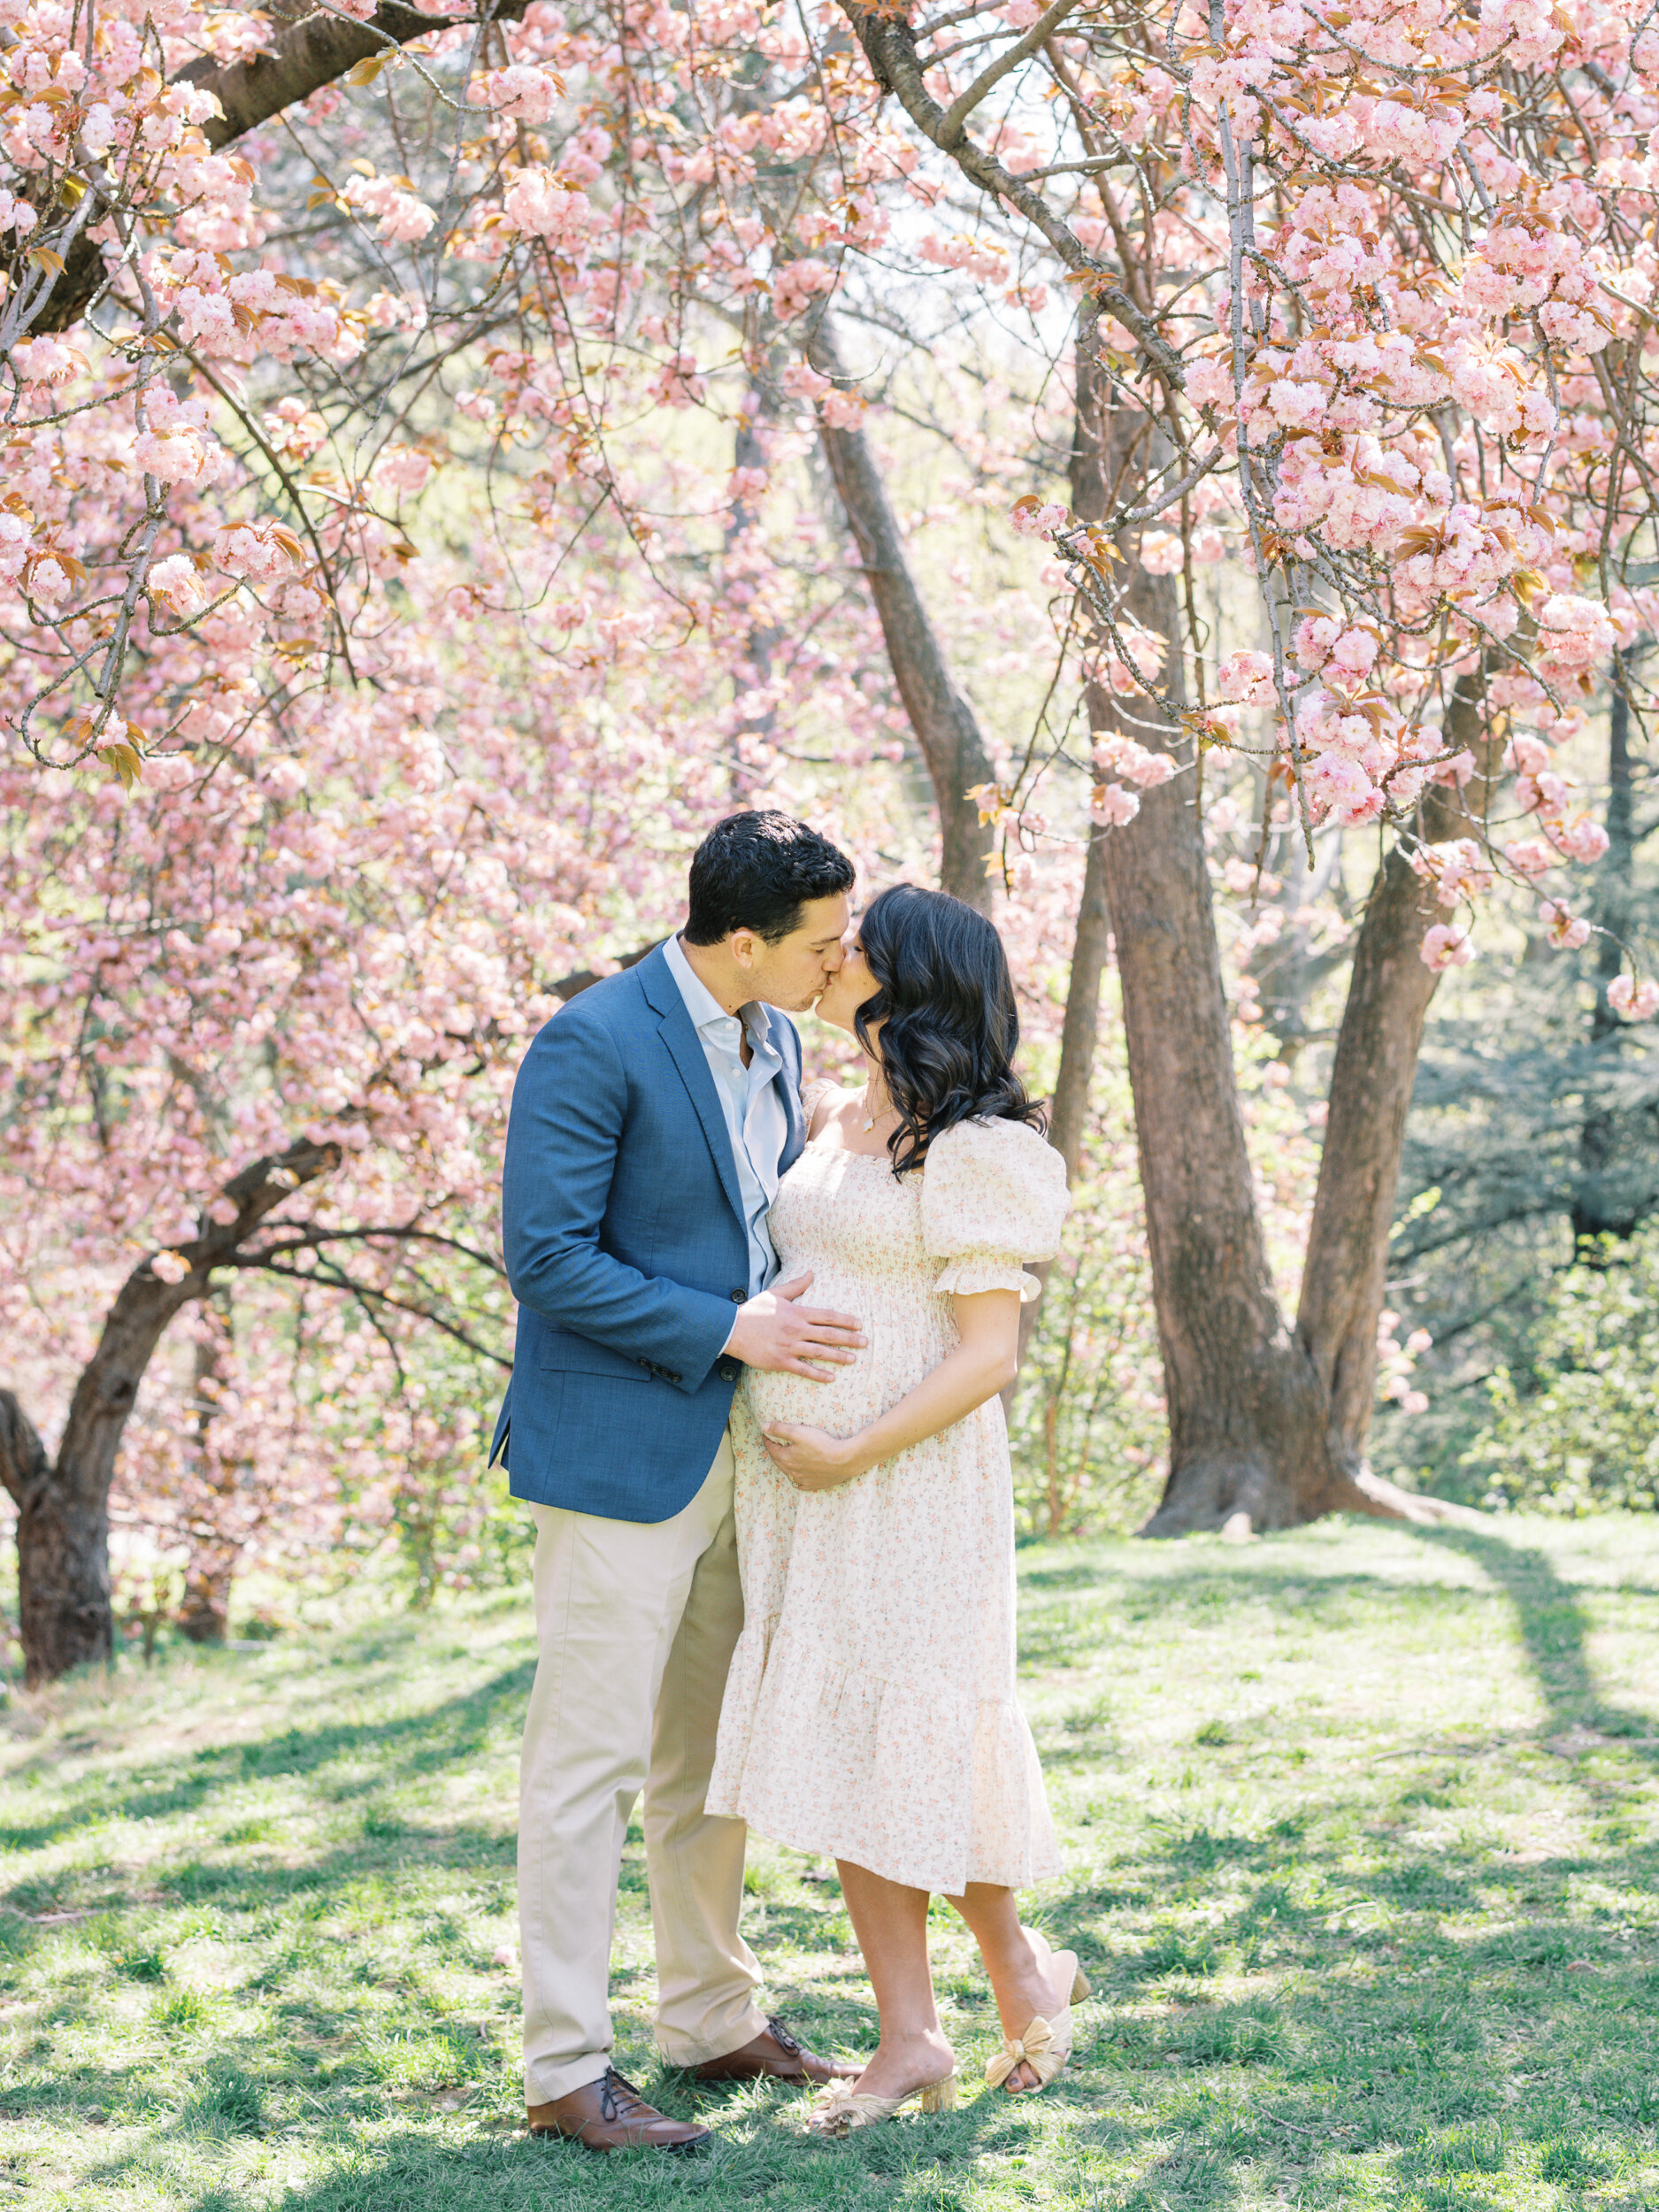 NYC Maternity Photography in Central Park during Springtime